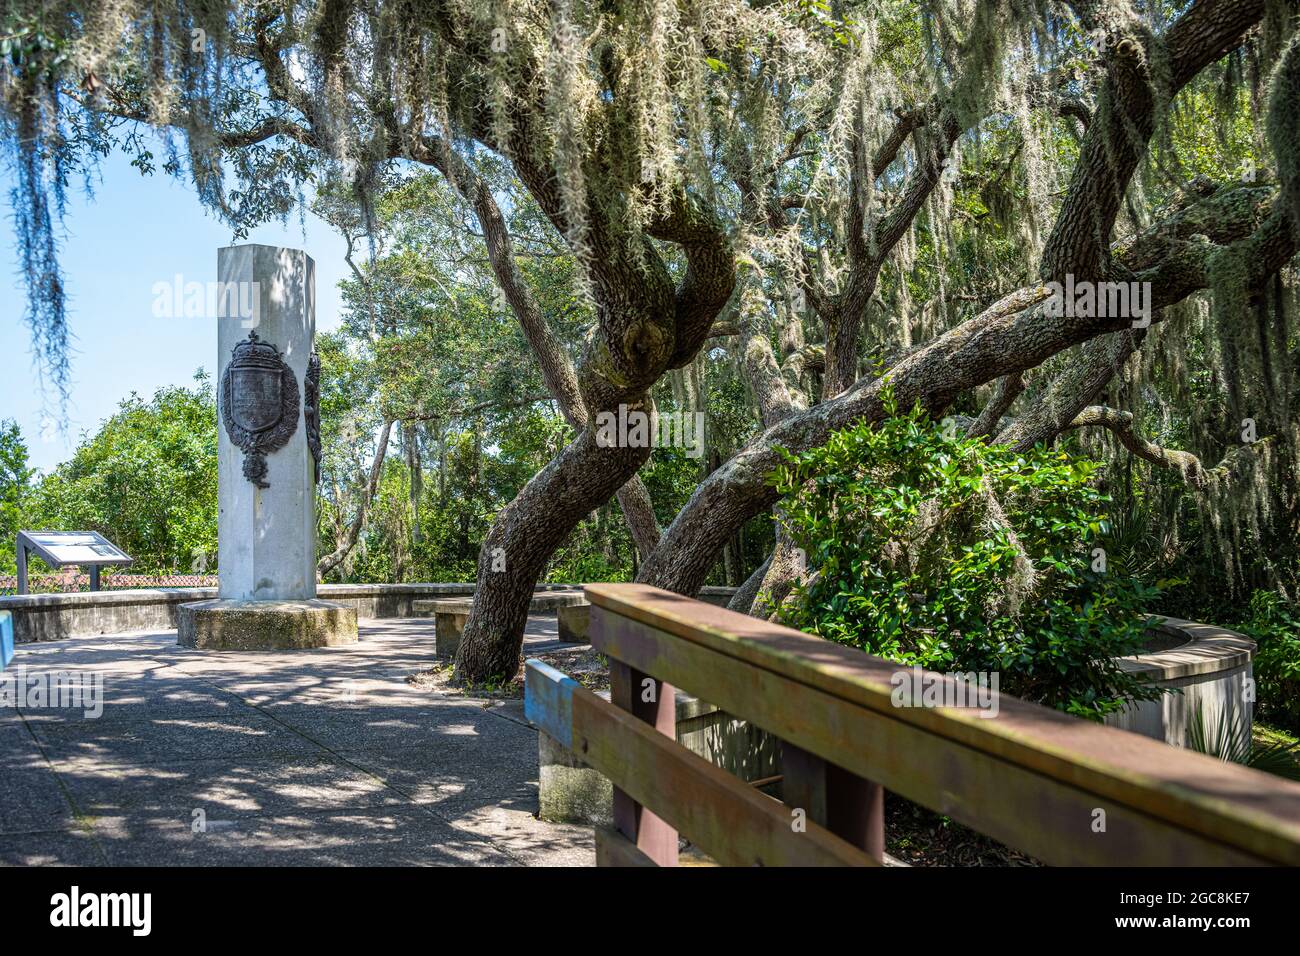 The Ribault Monument (Ribault Column) commemorates the 1562 landing of Jean Ribault near the mouth of the St. Johns River in current Jacksonville, FL. Stock Photo